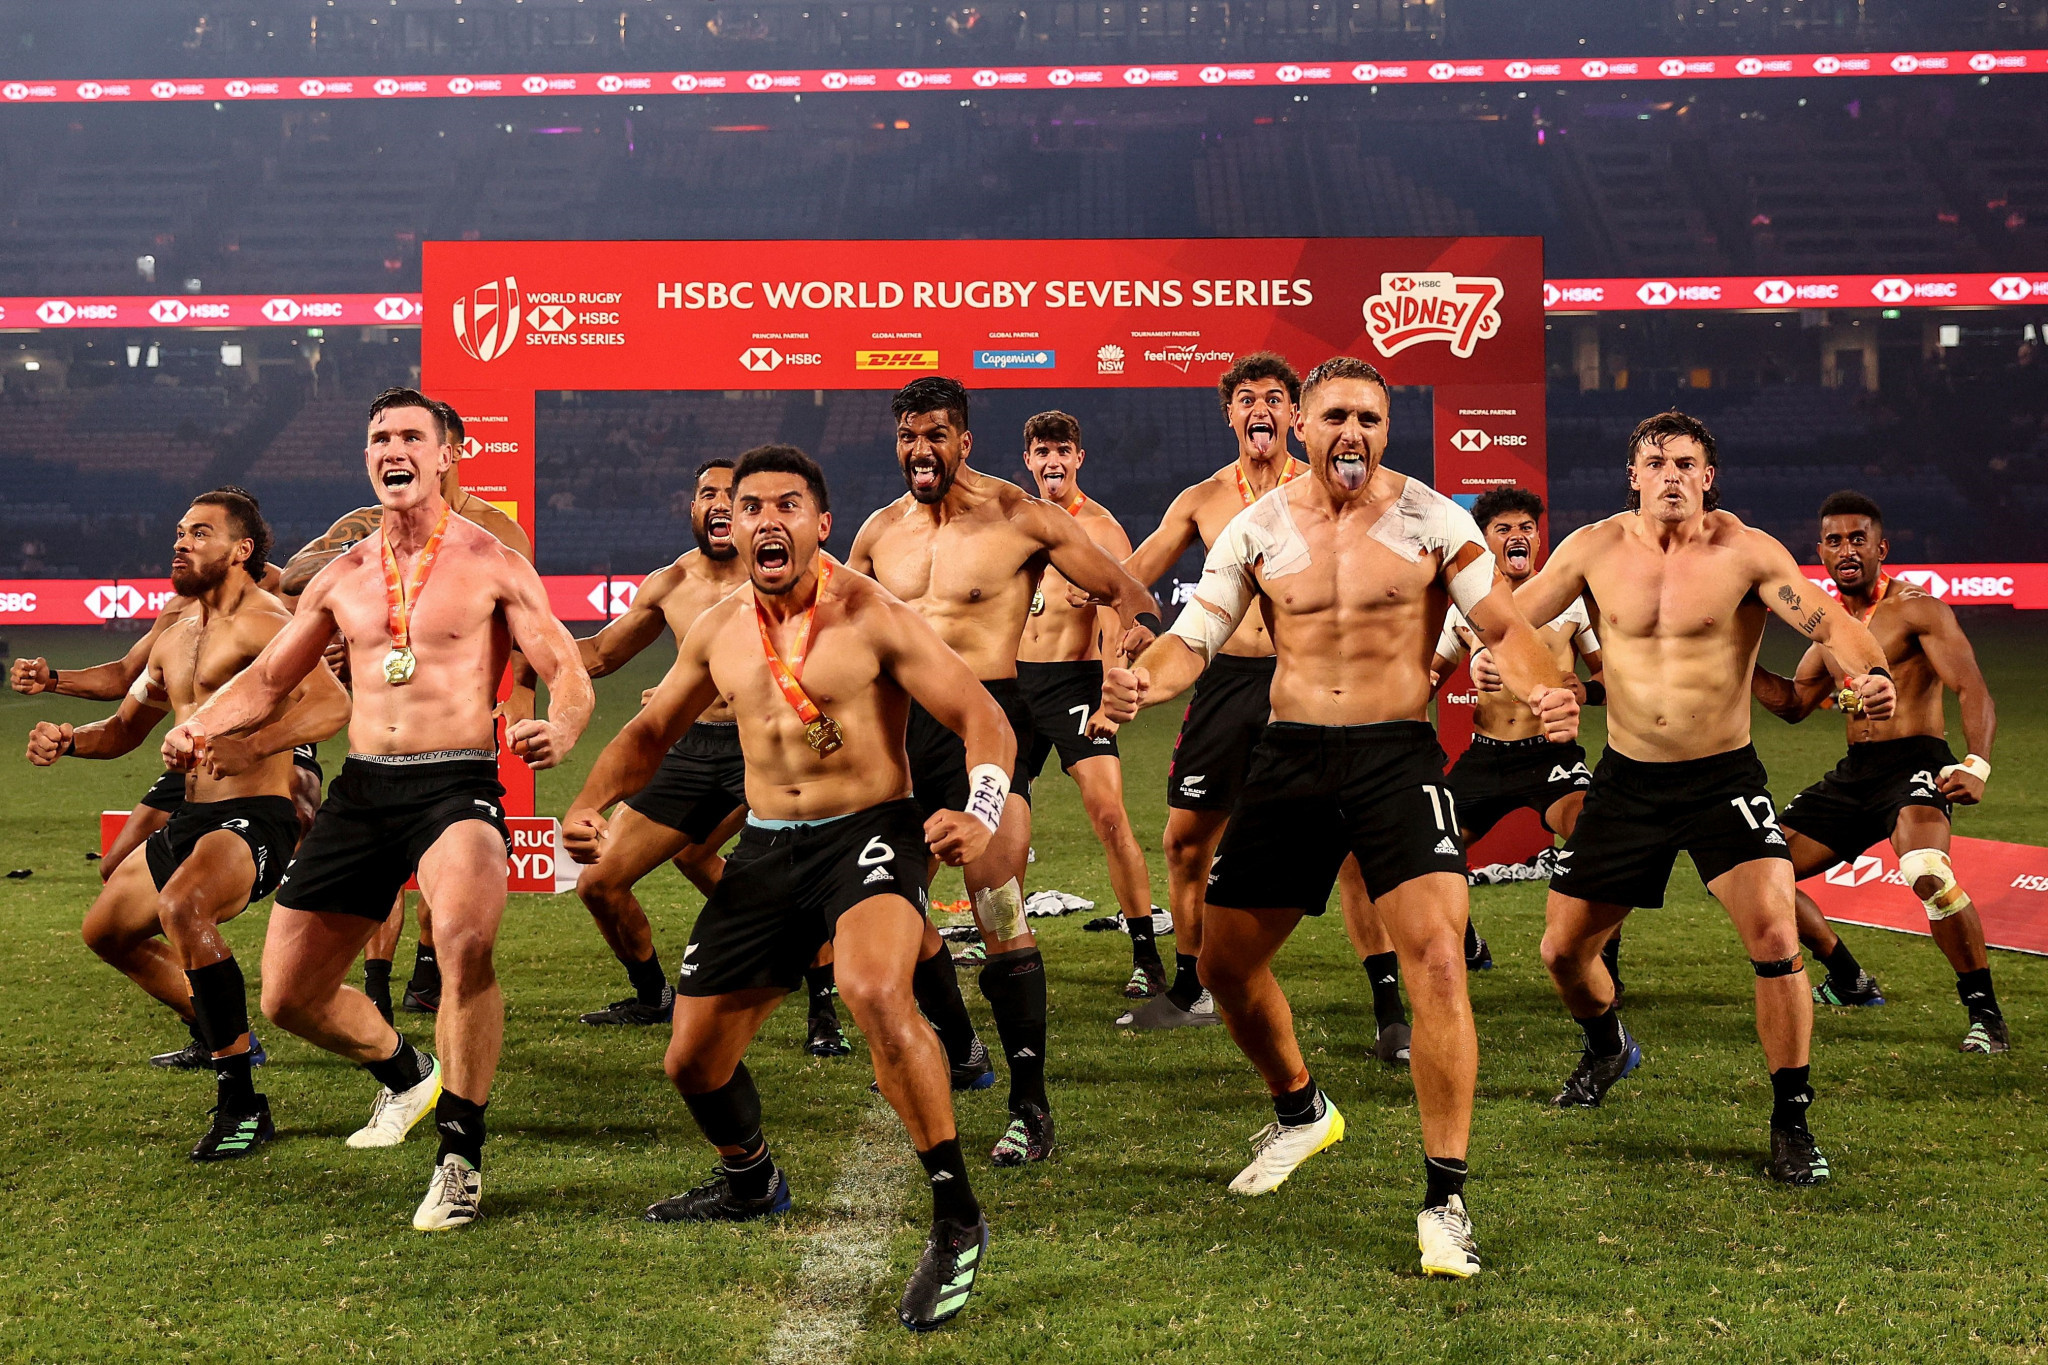 New Zealand perform a Haka after winning the men's title at the Sydney World Rugby Sevens Series event ©Getty Images